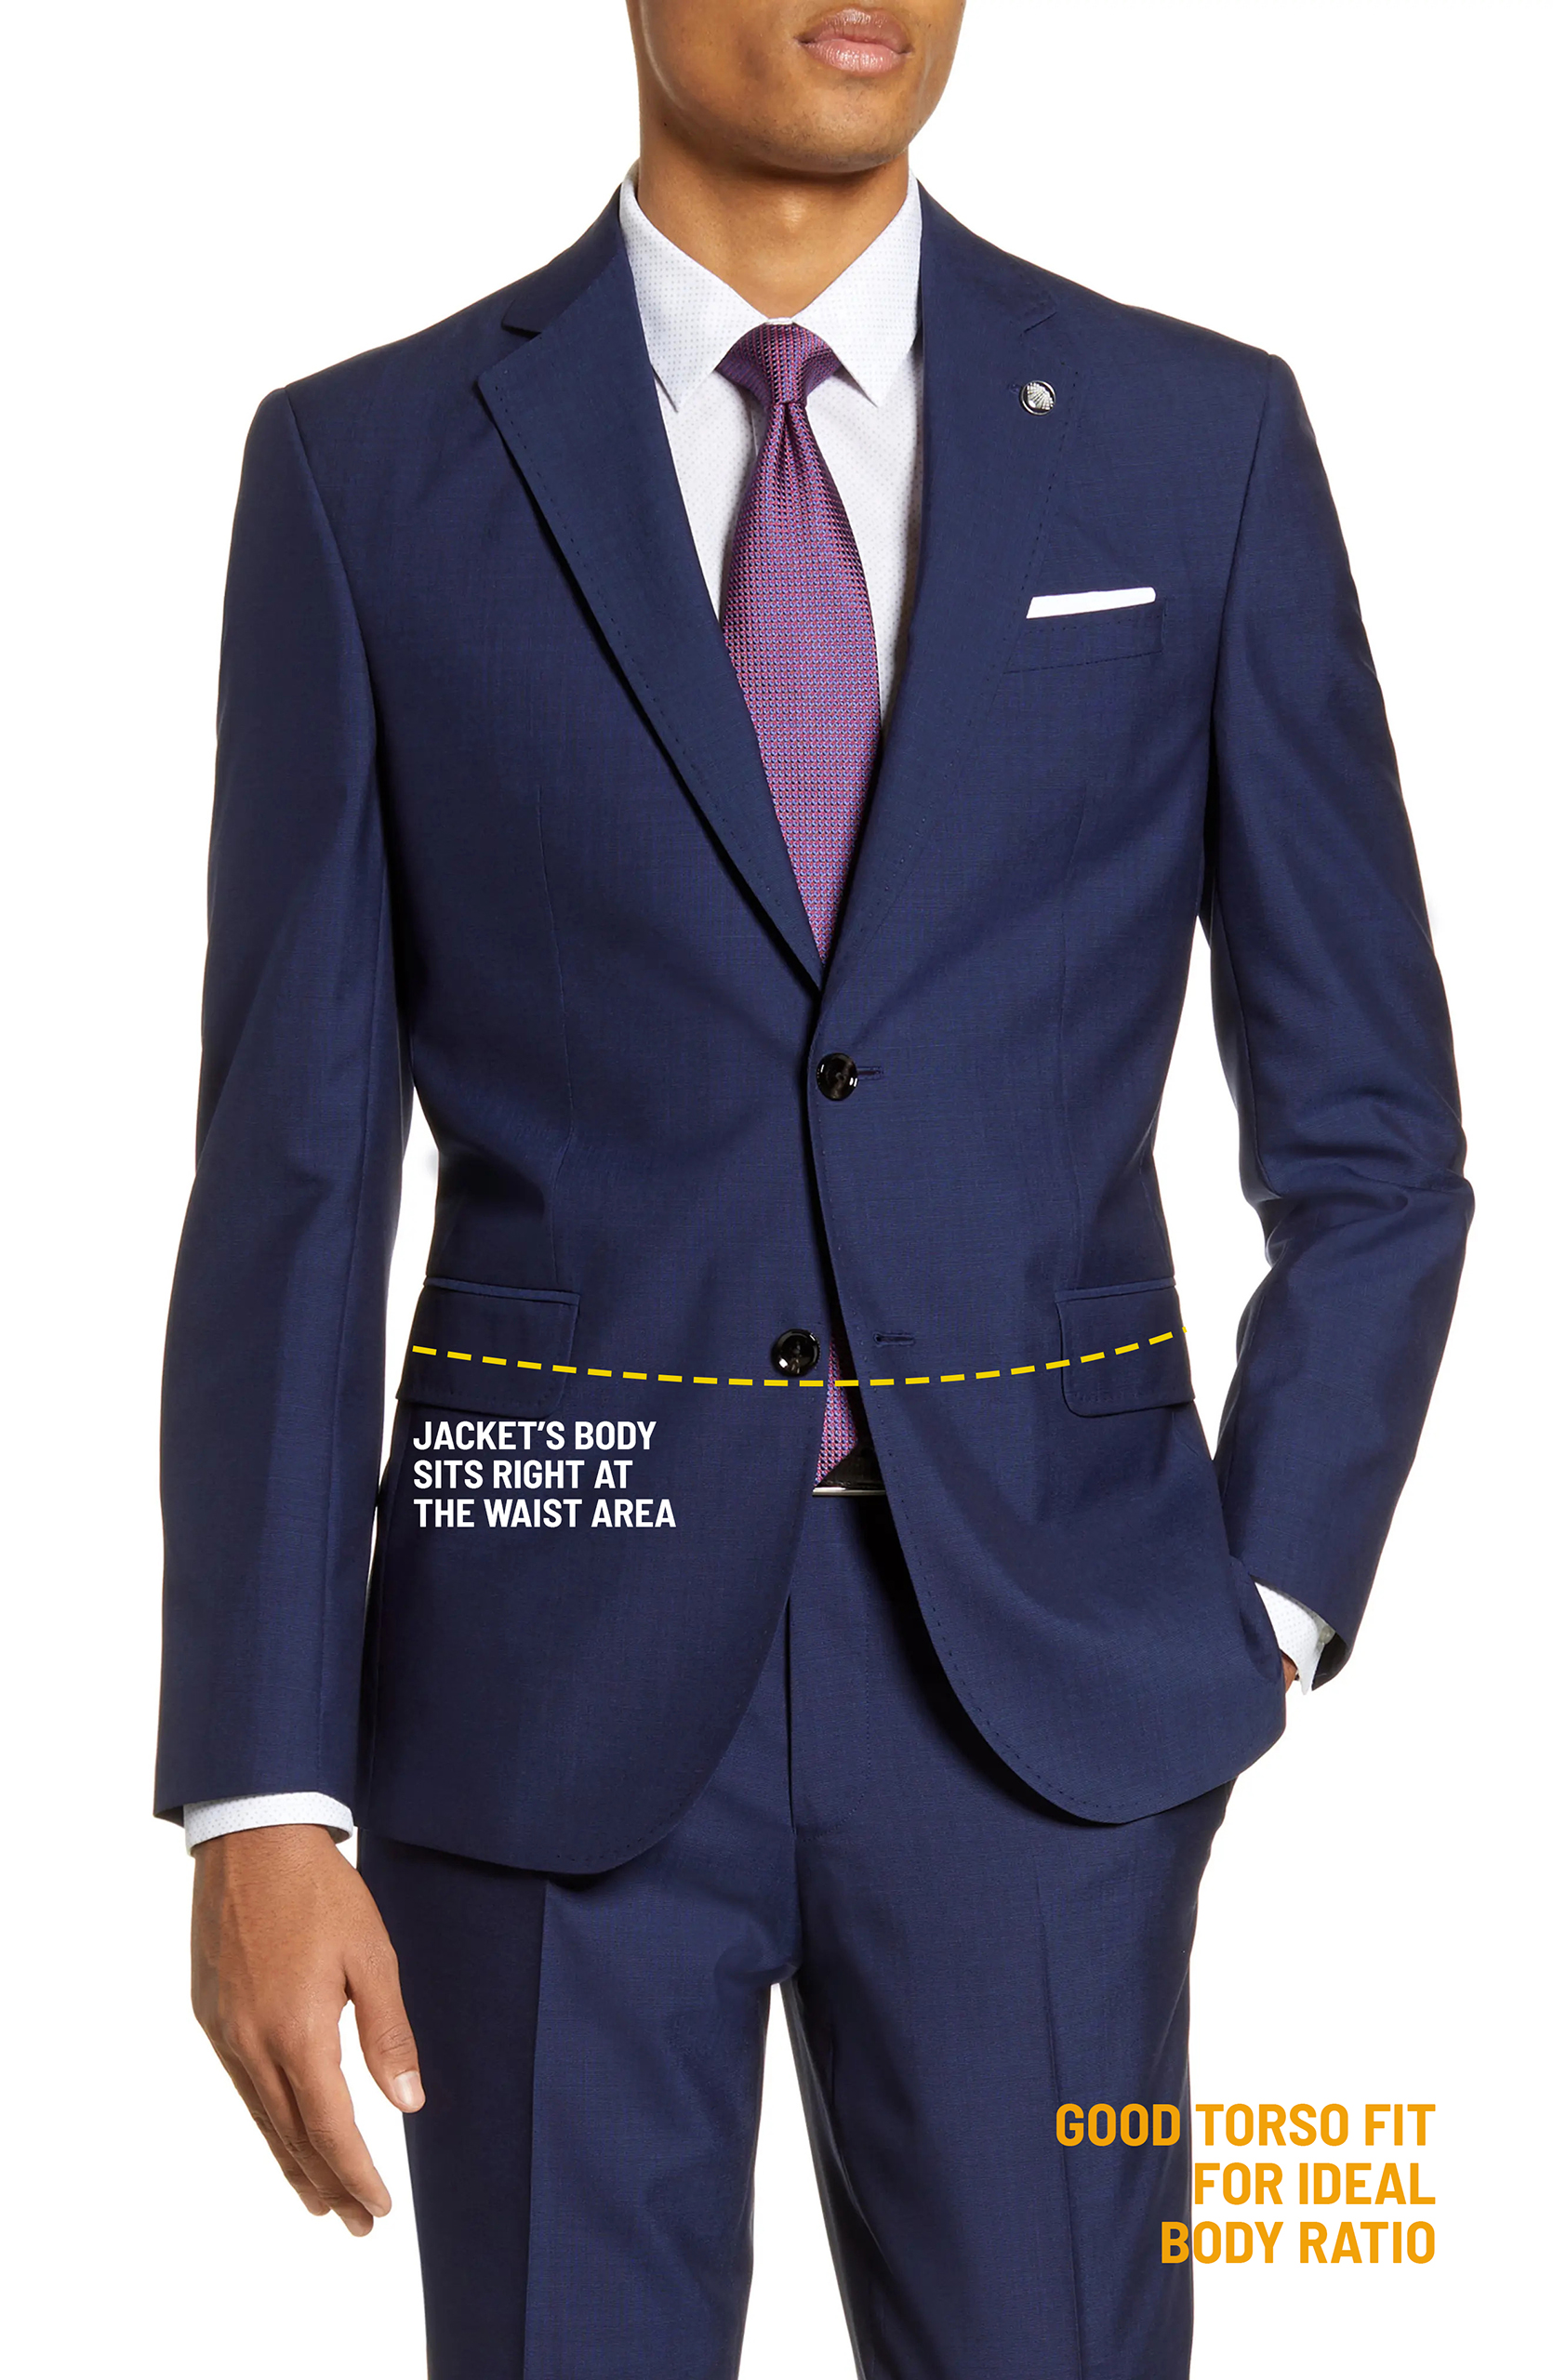 Good suit fit and proper torso for ideal body ratio